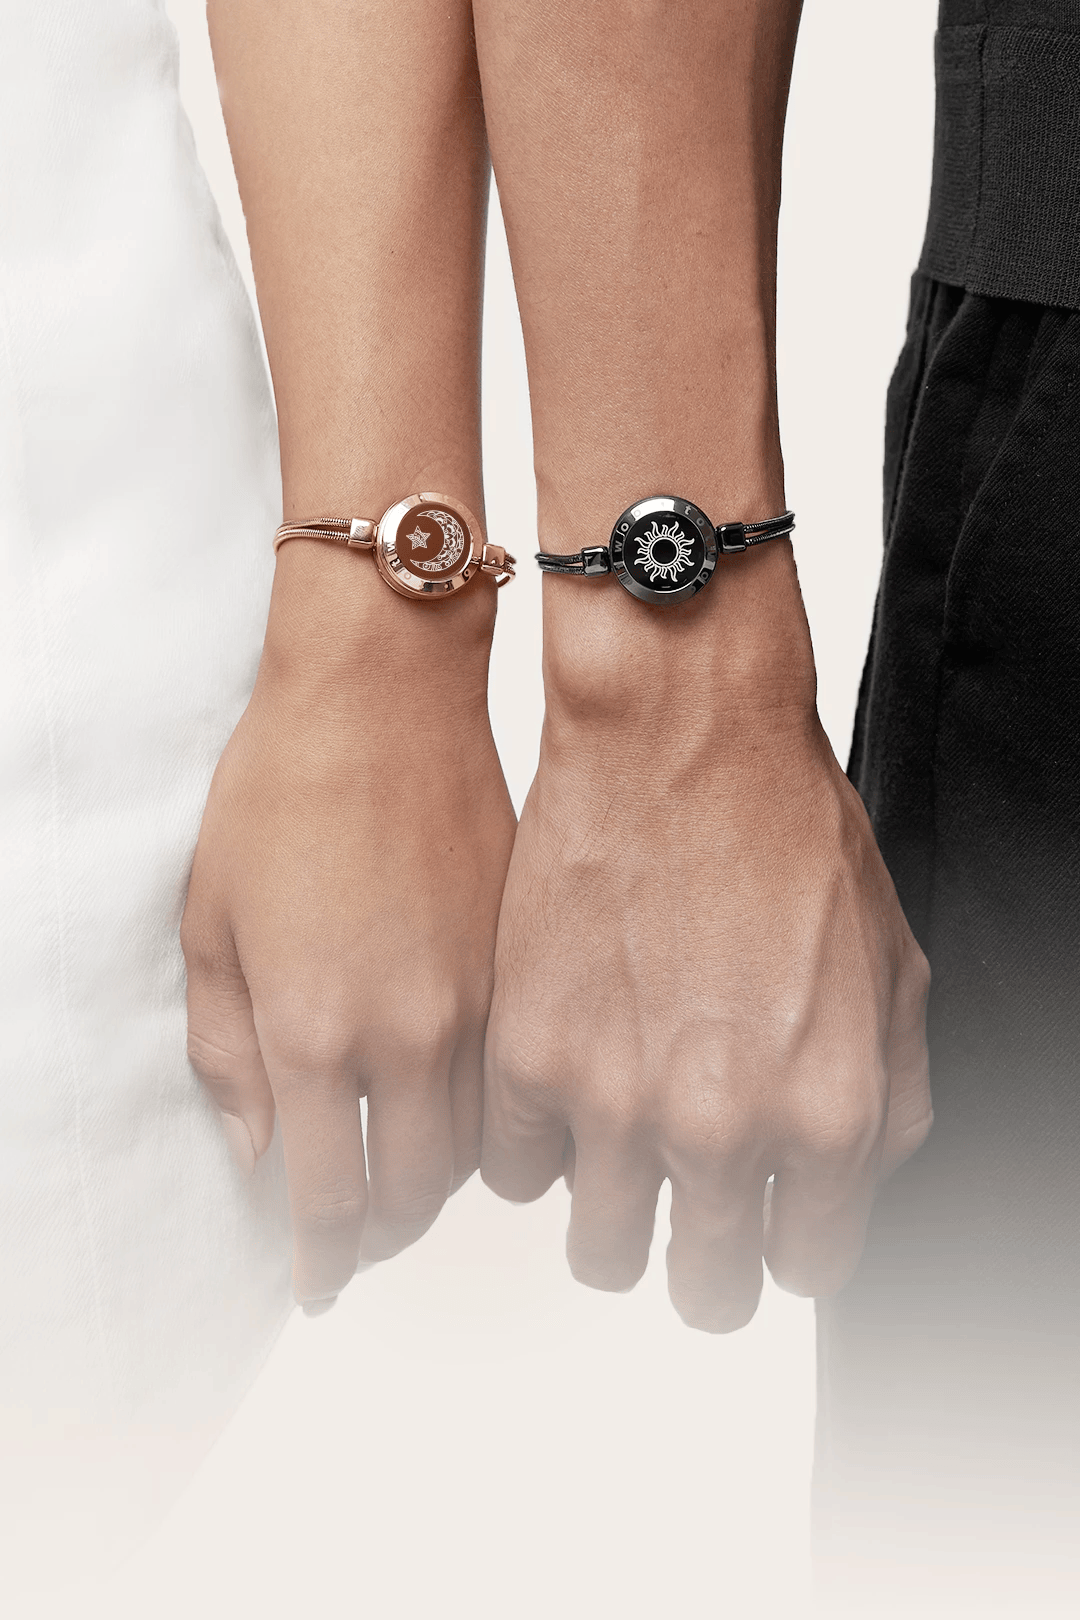 Magnetic Couple Bracelets, ELECDON King and Queen Crown Couple Bracelets  for Men and Women, Beads Couple Bracelet, Couples Gifts for Boyfriend  Girlfriend and Best Friend, 2 Pcs, Pink and Black price in